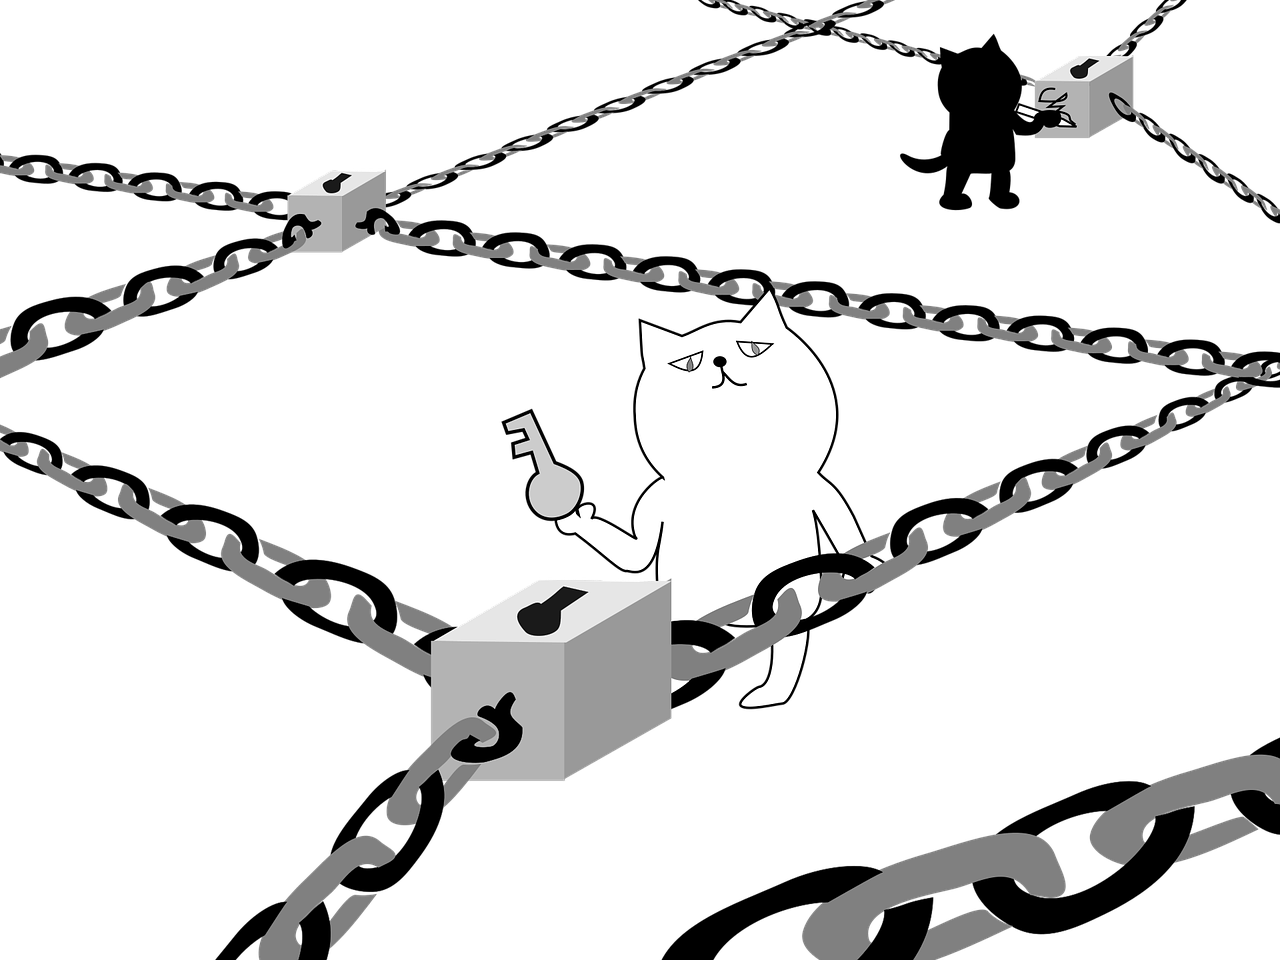 cats with keys and chains.